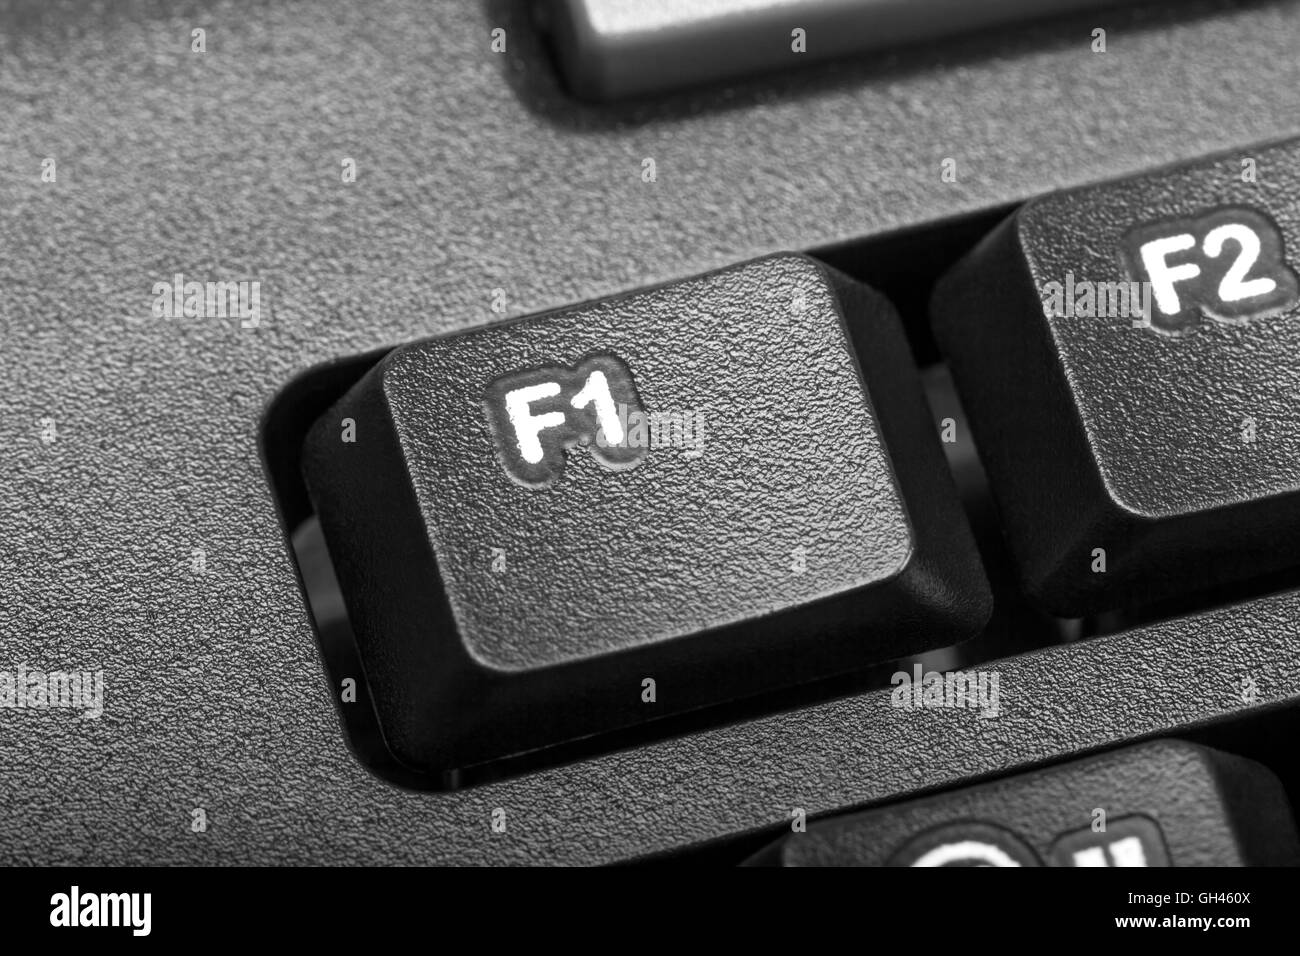 Electronic collection - detail black computer keyboard with key f1 Stock Photo